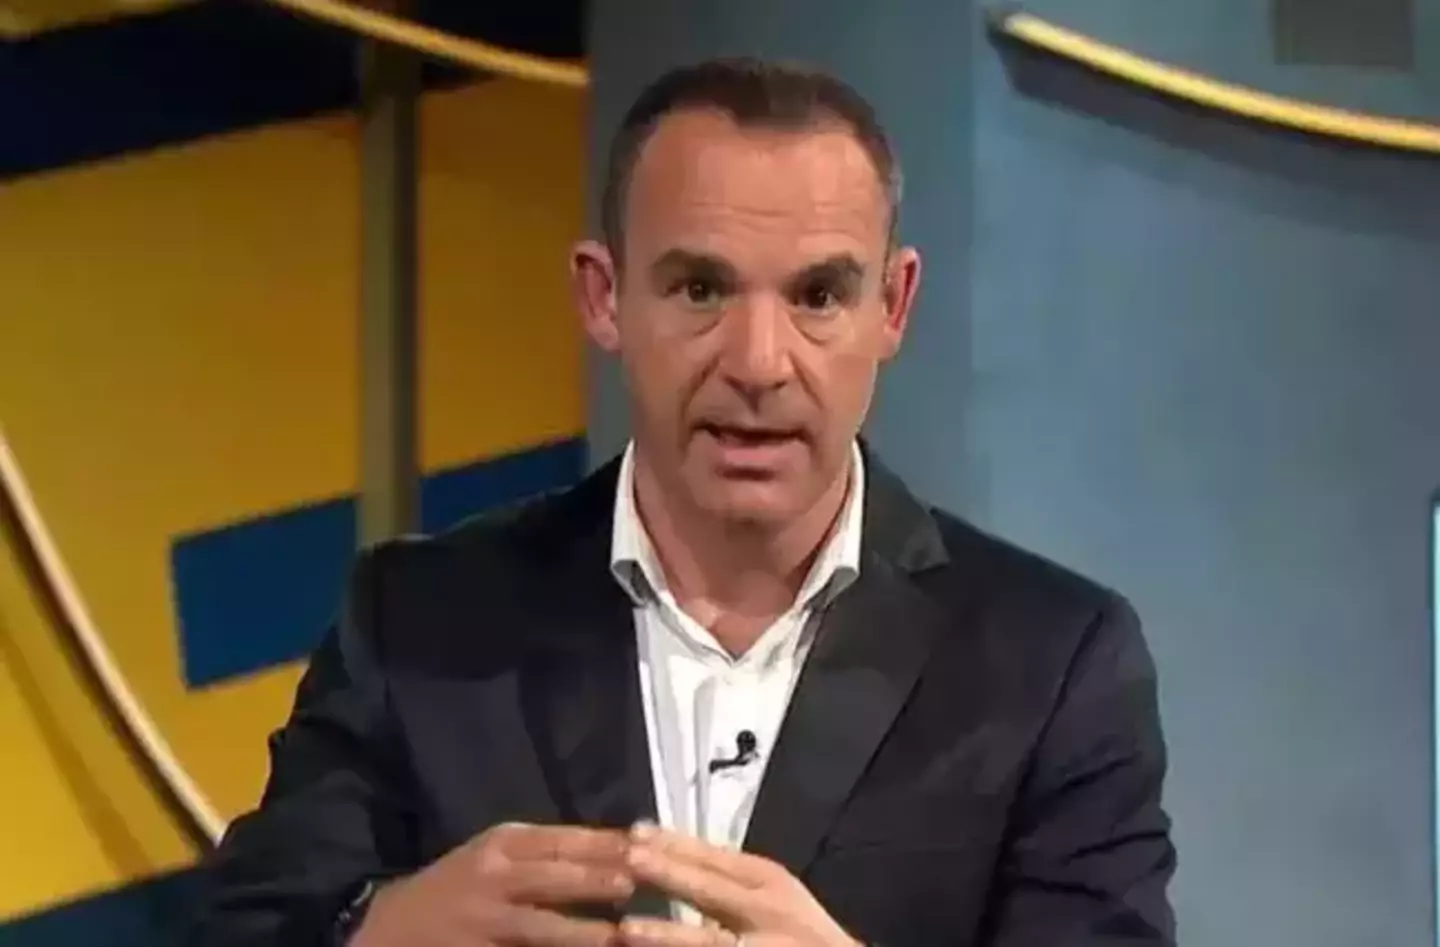 Martin Lewis described debit cards for someone in their overdraft as 'danger cards'.